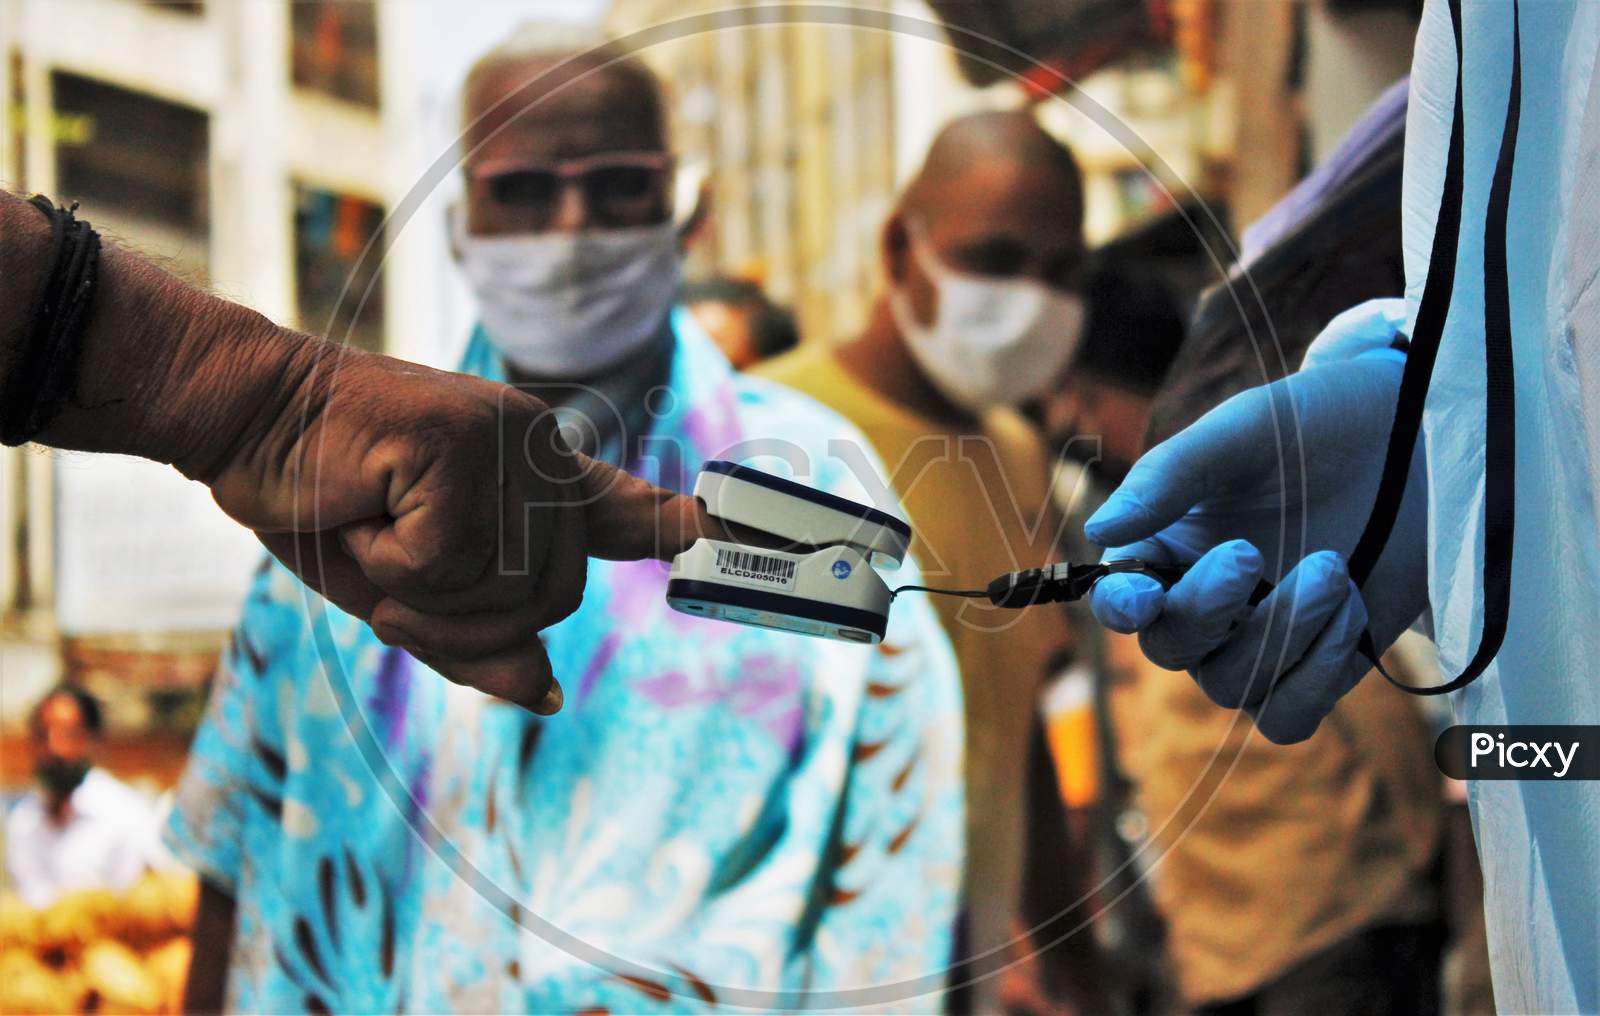 People watch as a healthcare worker measures the pulse of a resident at Dharavi, as a preventative measure against the spread of coronavirus disease, in Mumbai, India on June 21, 2020.